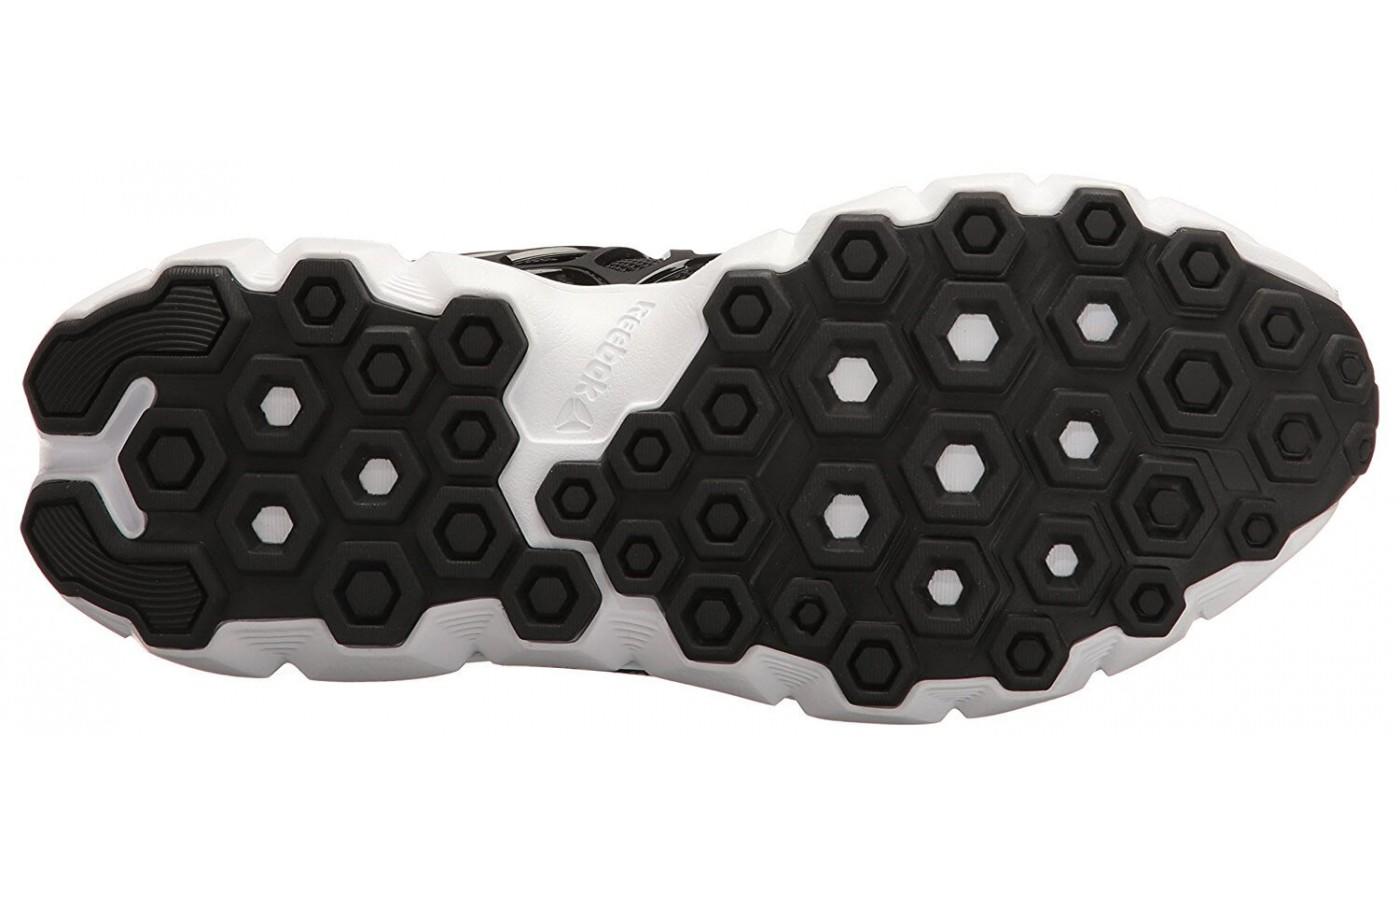 The outsole is designed with a honey comb pattern